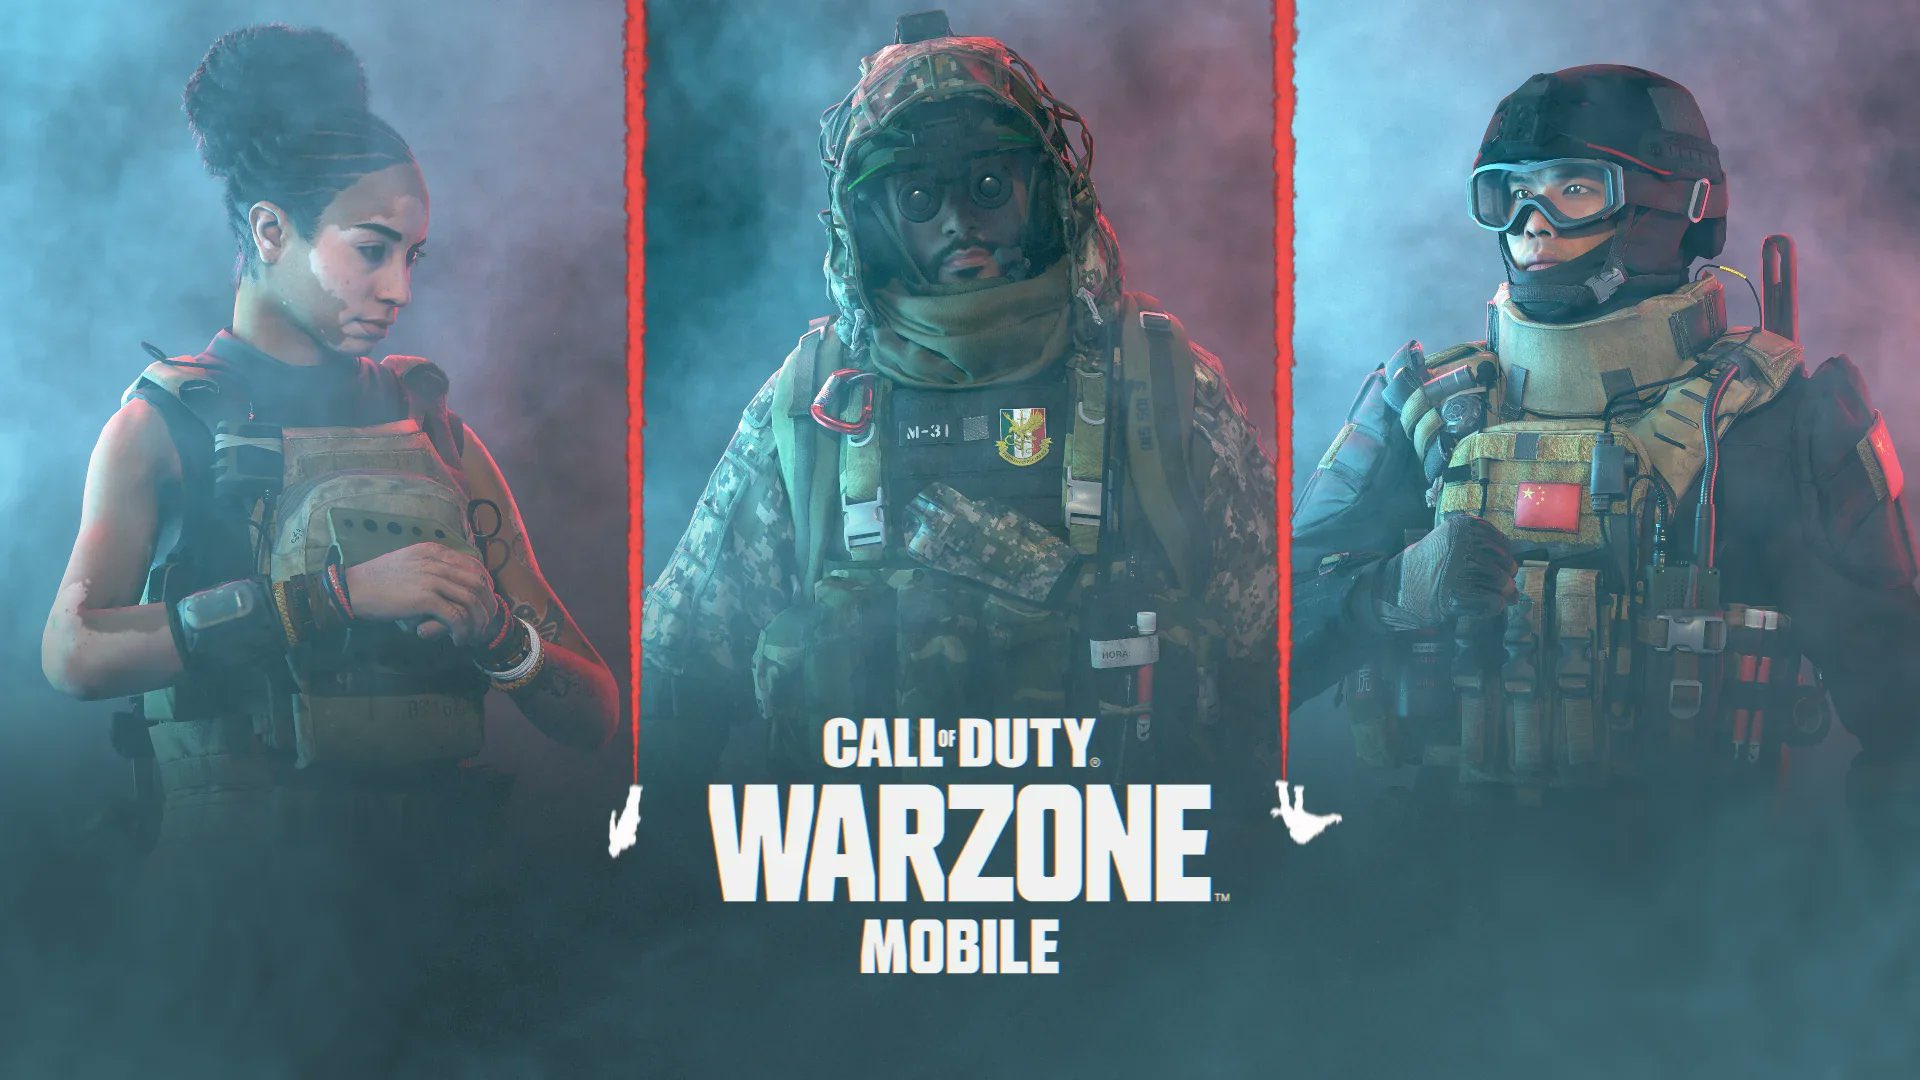 Call of Duty Warzone Mobile officially announced ahead of full